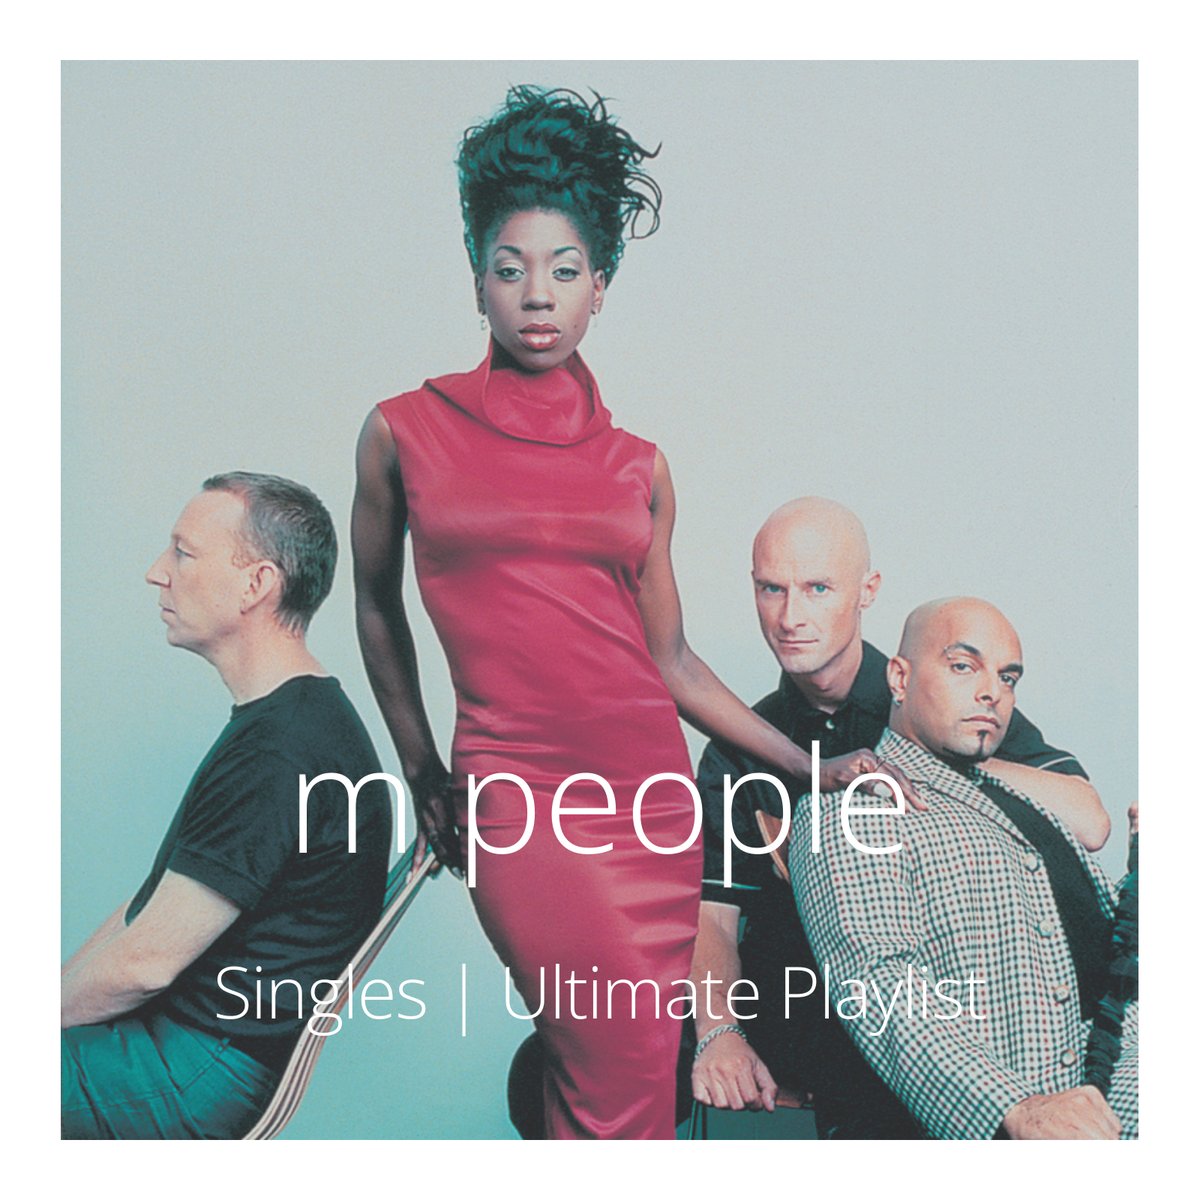 Spotify Playlist | Ultimate M People | The Singles Collection open.spotify.com/playlist/6Uowm… Singles by M People & the band members own releases. #Spotify #SpotifyPlaylist #MPeople #MikePickering #PaulHeard #HeatherSmall #Shovell #HotHouse #QuandoQuango #TCoy #AceOfClubs #NaturalLife